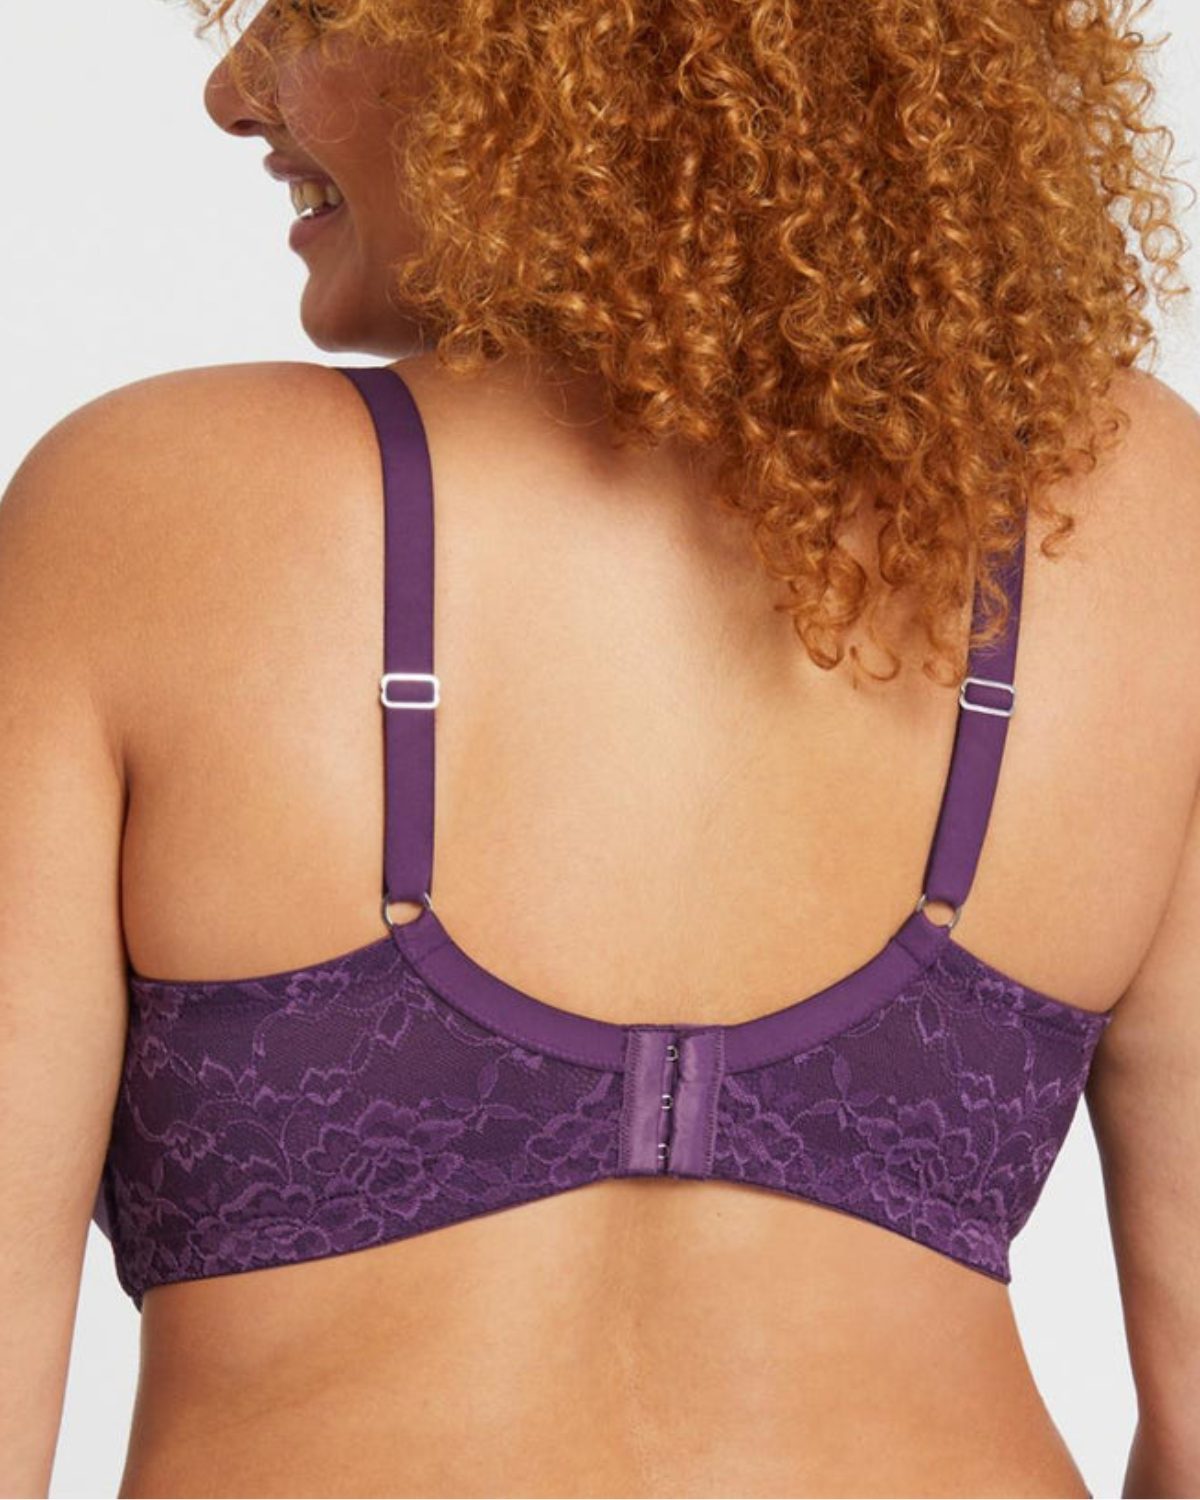 Model wearing a wire free molded cup bra with lace wings in purple